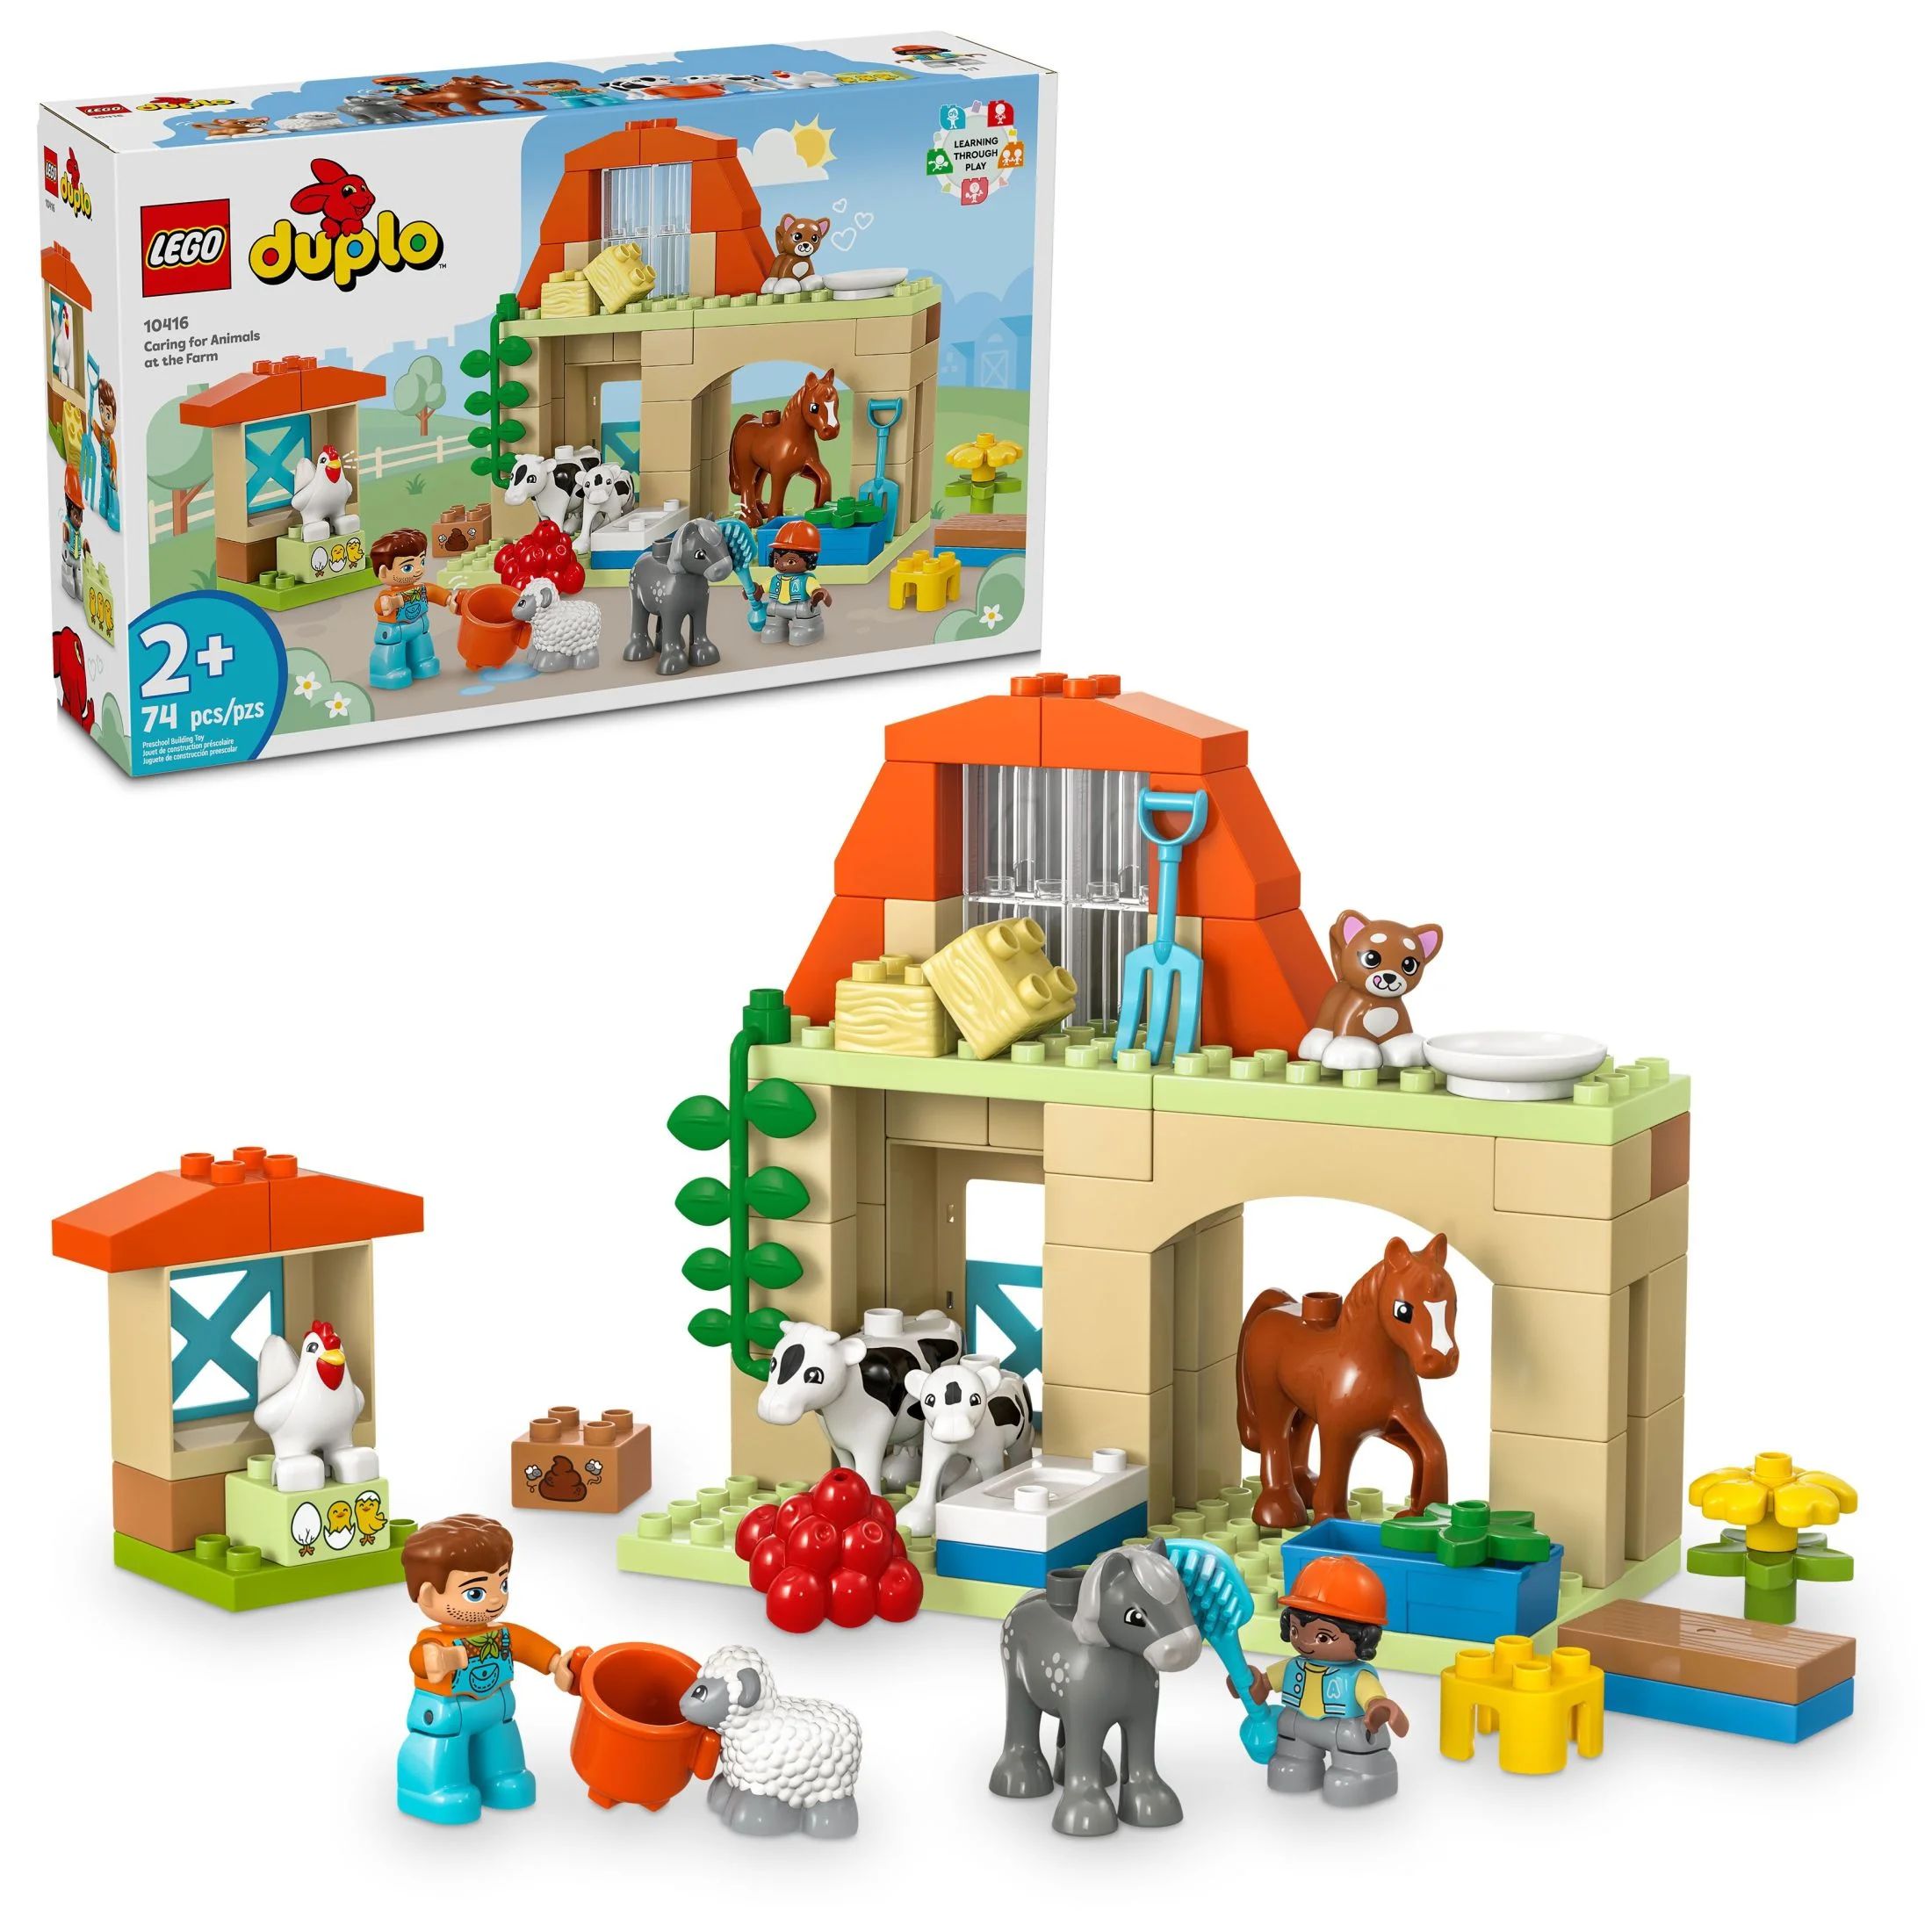 LEGO DUPLO Town Caring for Animals at the Farm Learning Toy for Toddlers, Farmhouse with Horse, C... | Walmart (US)